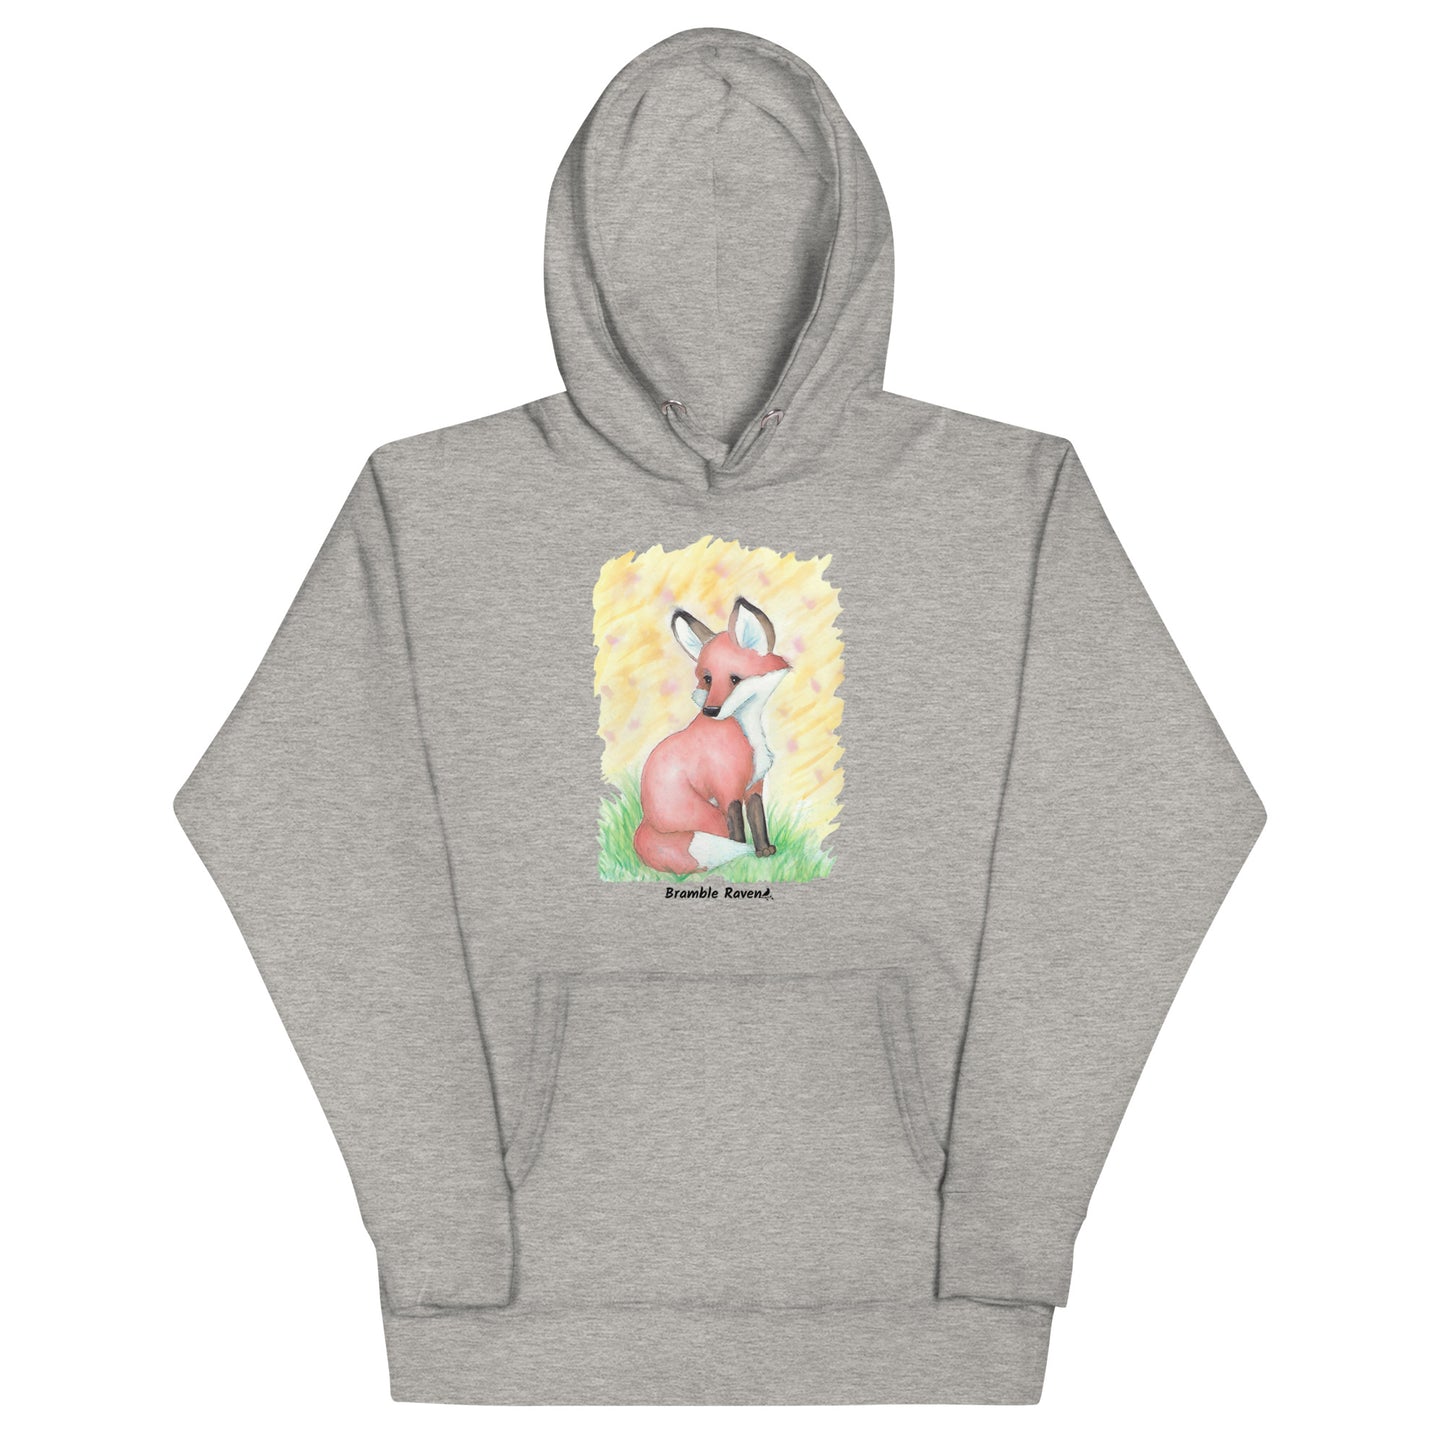 Unisex carbon grey colored hoodie. Features original watercolor painting of a fox in the grass against a yellow backdrop.